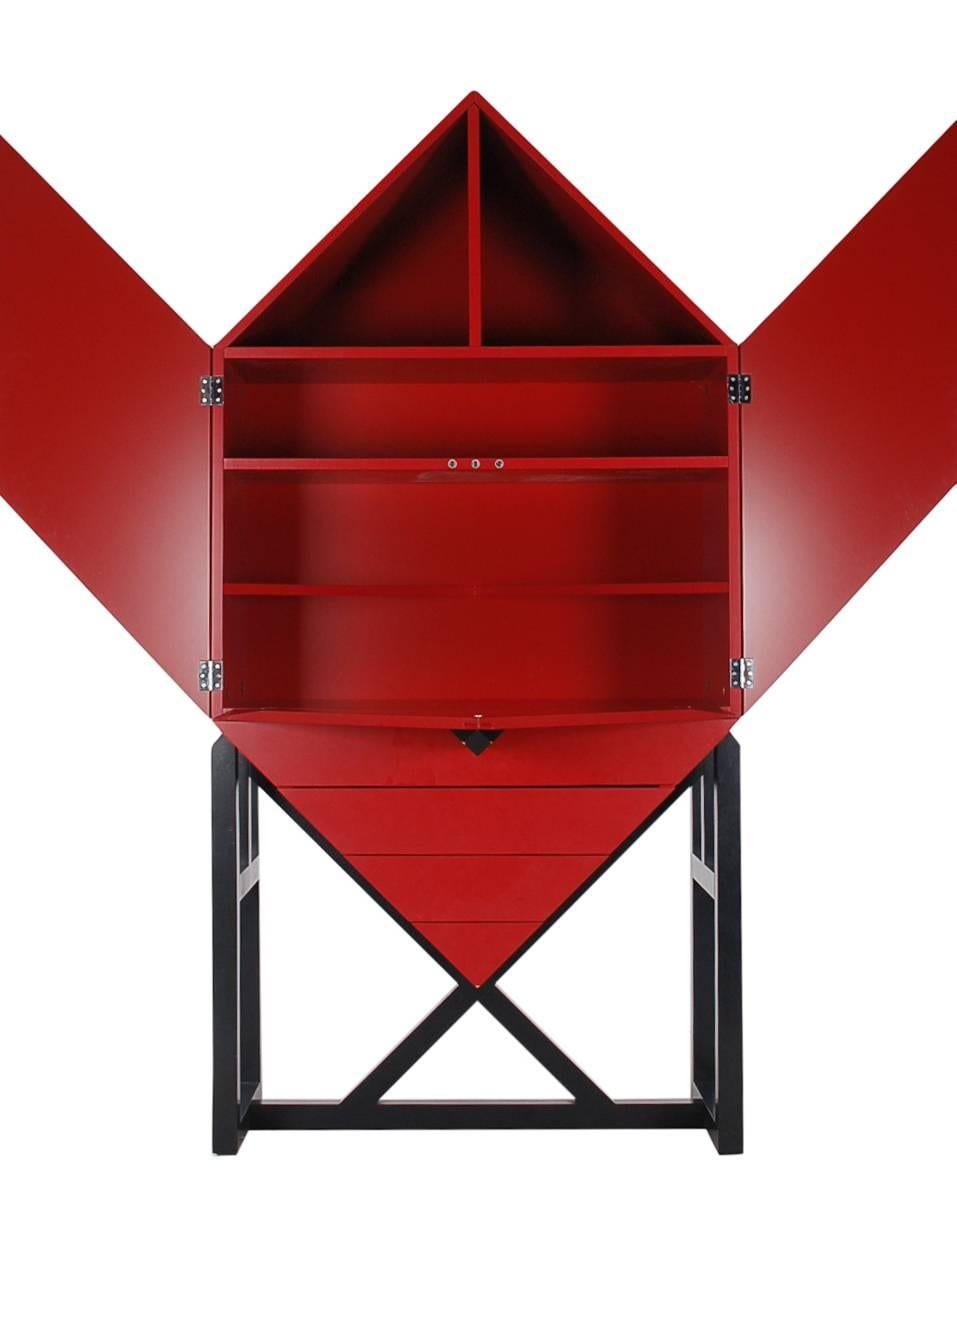 A gorgeous postmodern designed cabinet, circa 1980s. It features extremely well built red cabinetry with ingenious doors and drawer design. In the manner of Ettore Sottsass for Memphis.